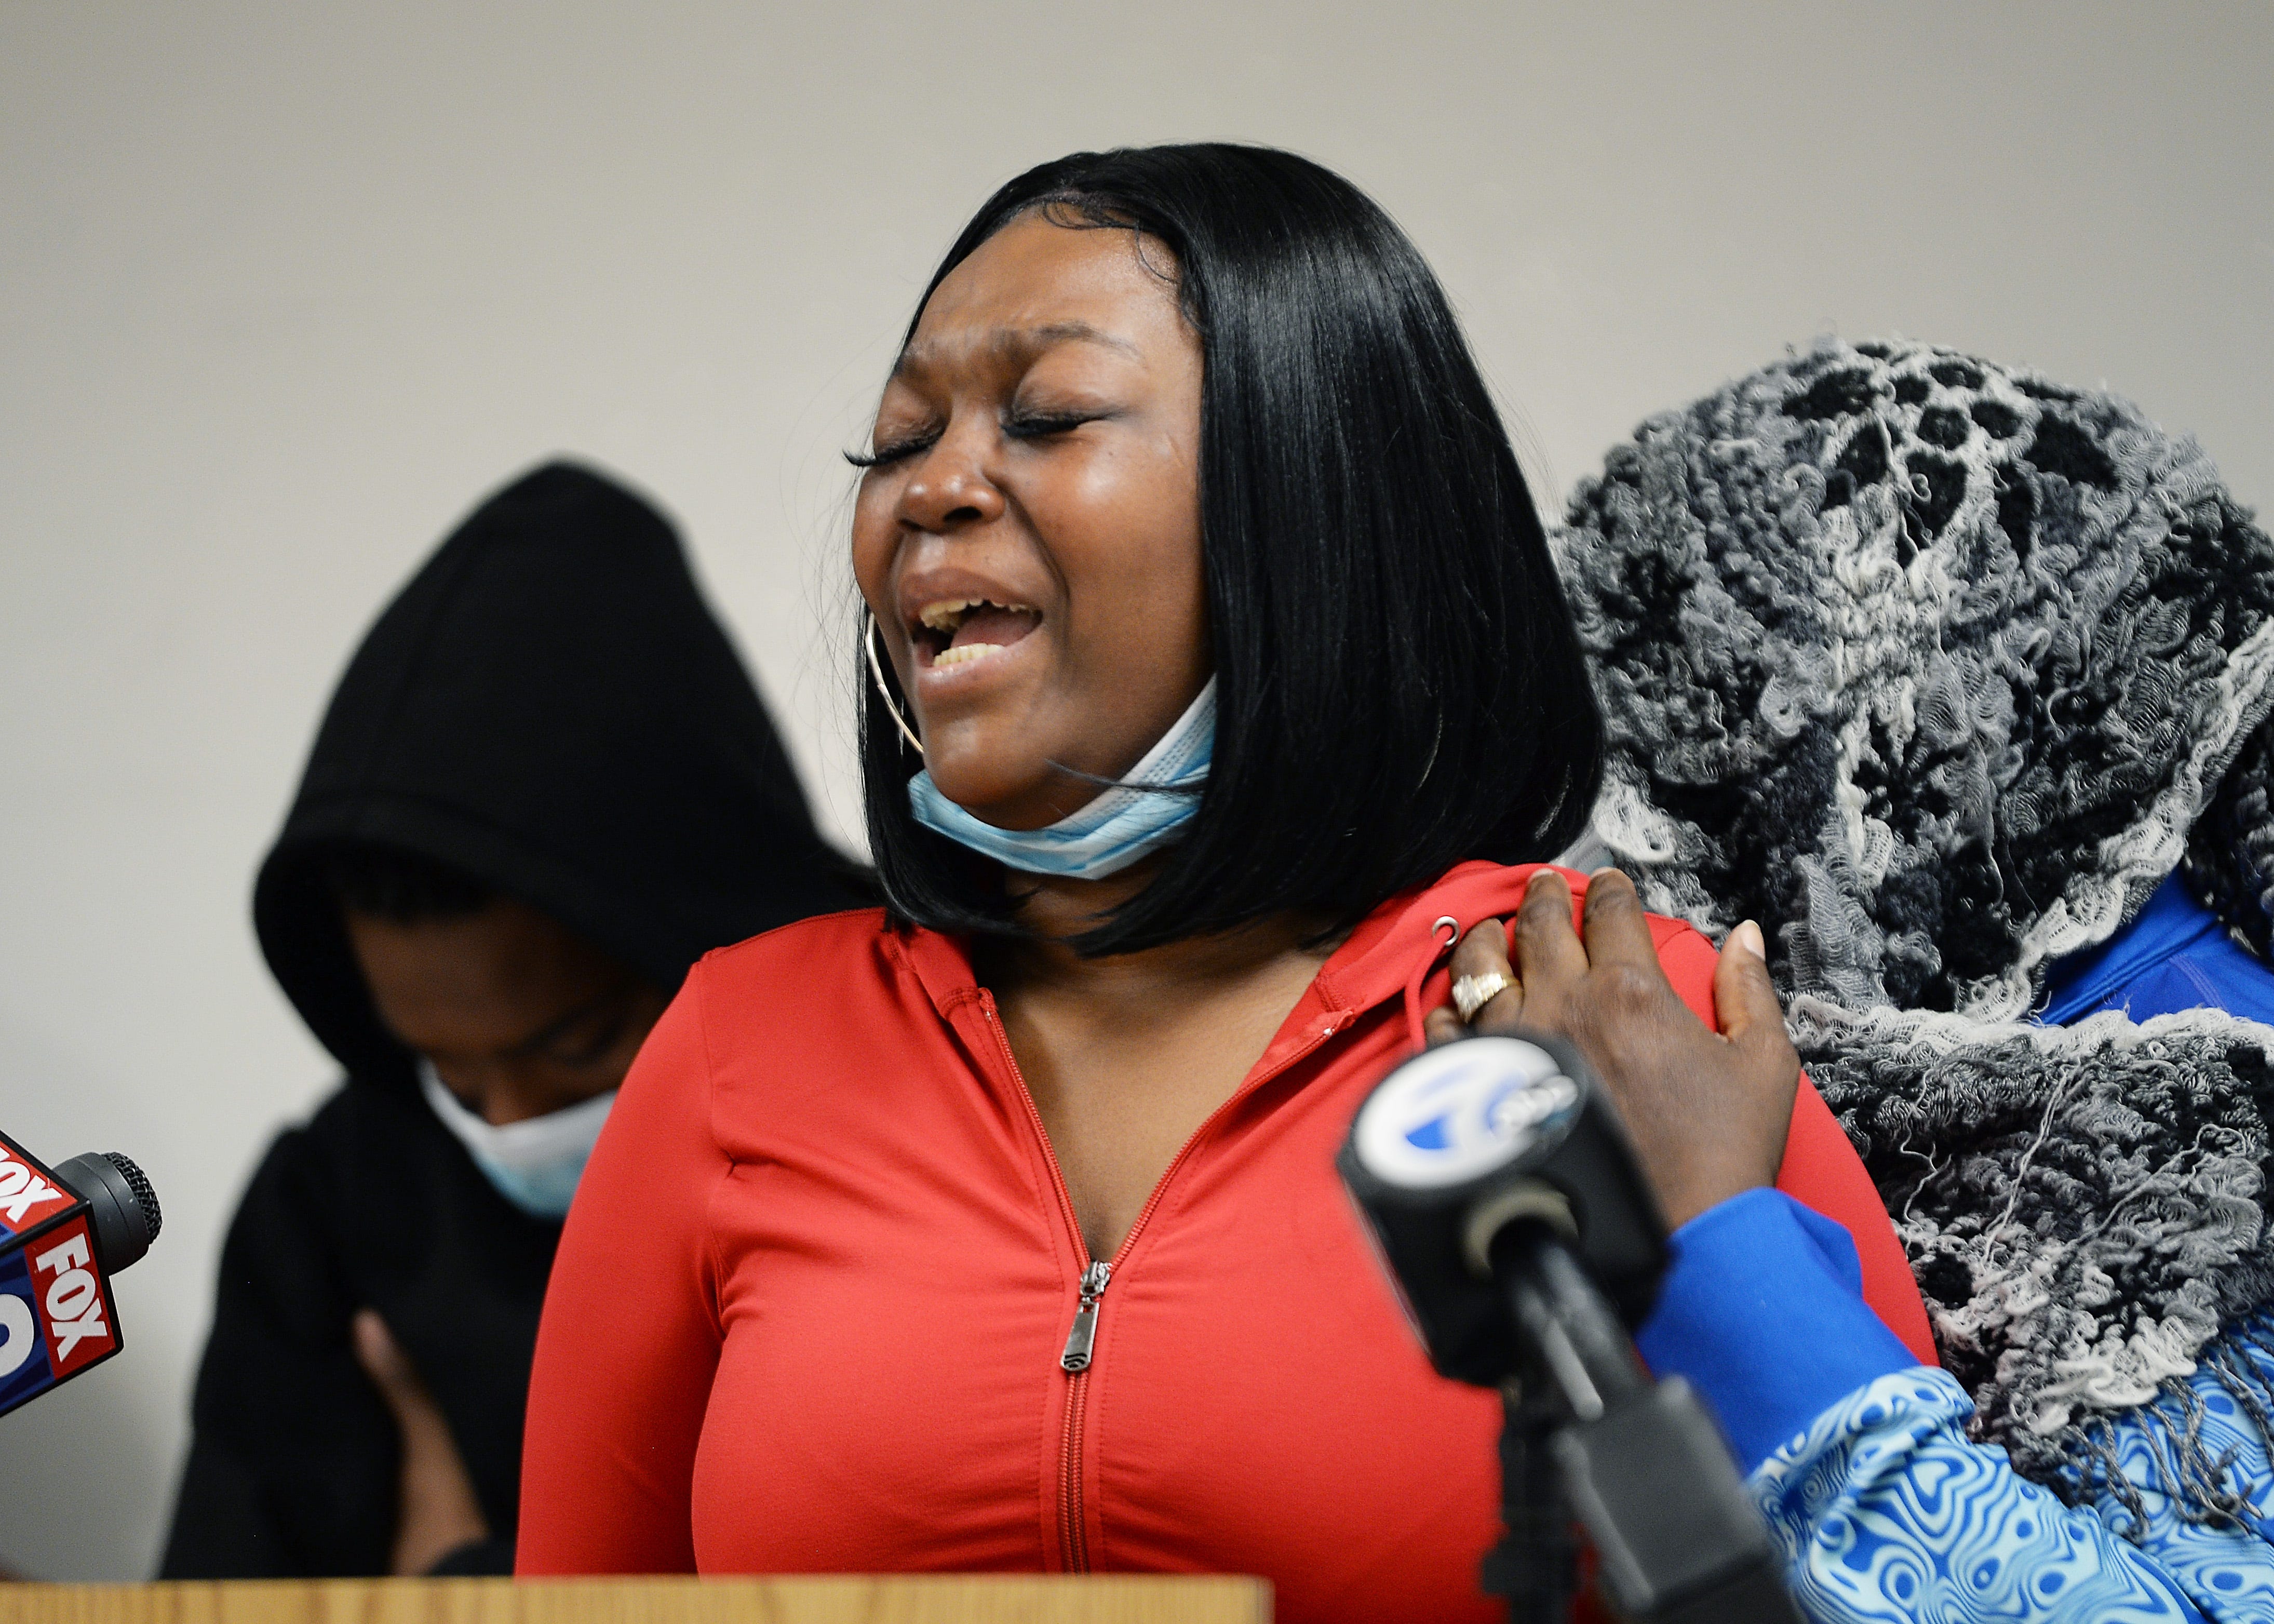 An emotional Etosha Williams, 34, of Detroit, mother of victim Reginae Williams, 7, talks about her daughter and pleads for the shooters to turn themselves in.